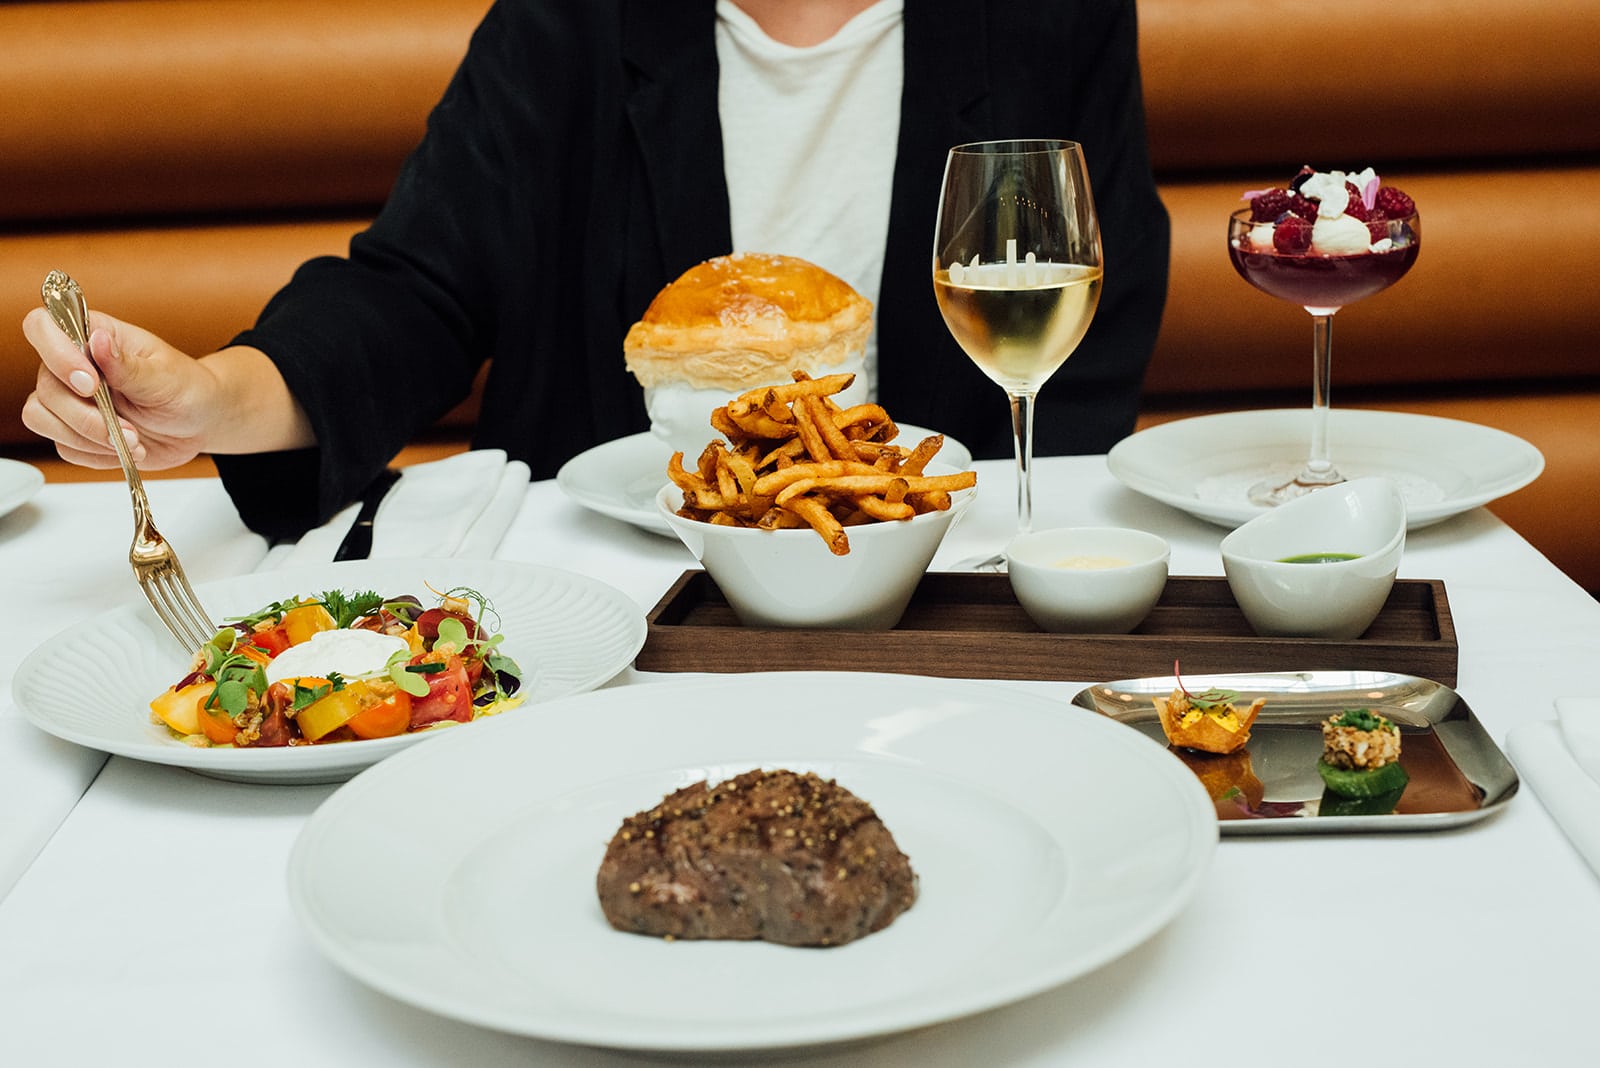 Where to go for important business lunches in downtown Montreal